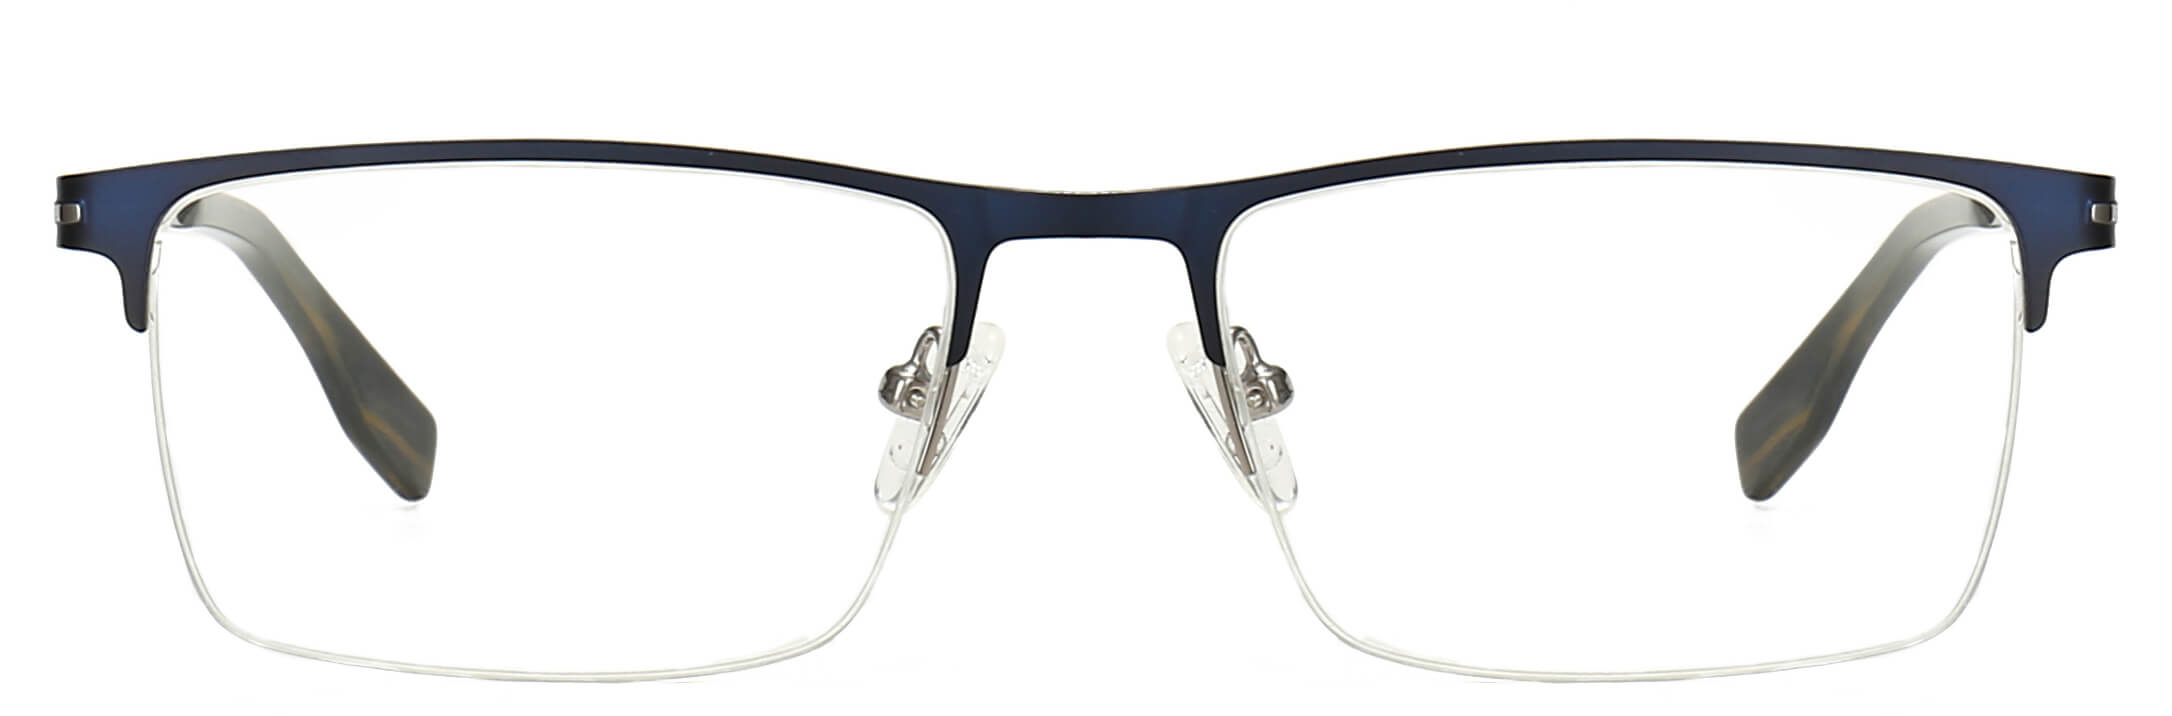 Mylo Square Blue Eyeglasses from ANRRI, front view